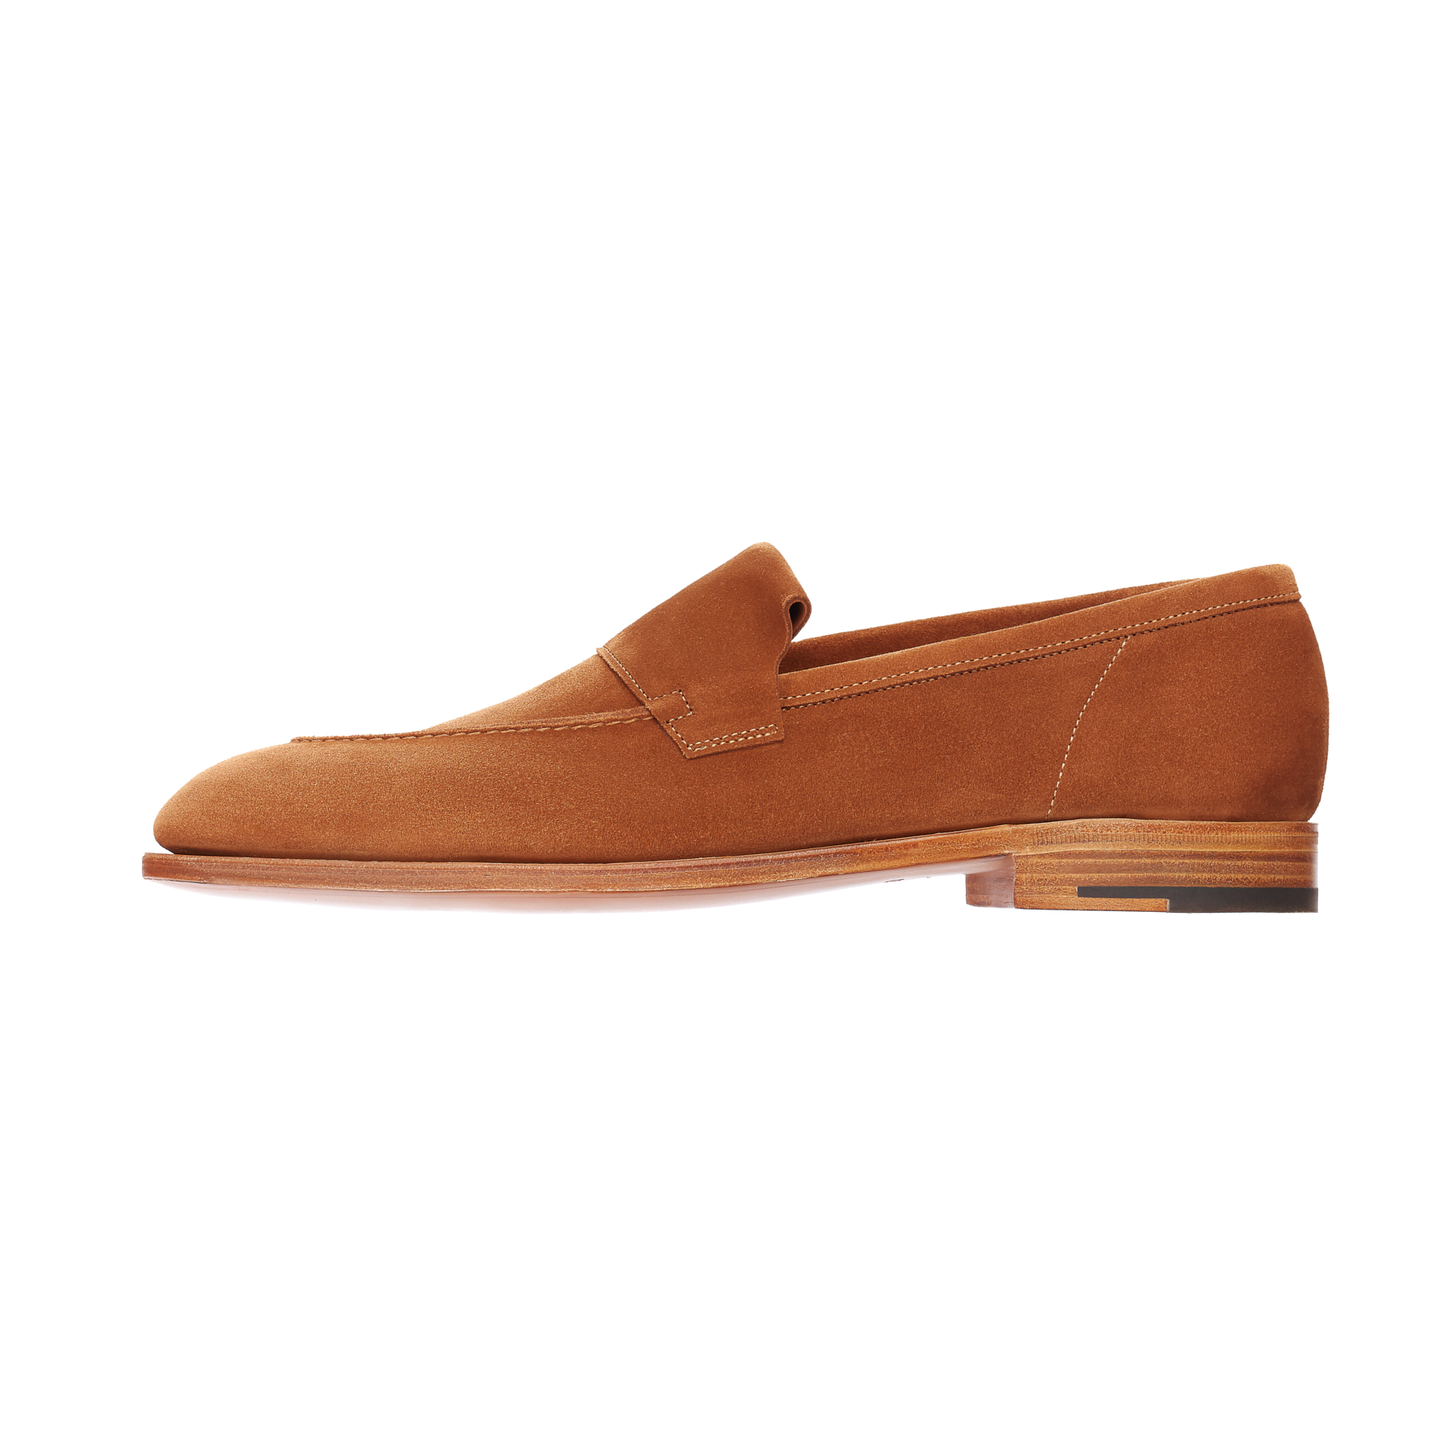 John Lobb "Aley" Suede Loafer with Hand-Stitched Apron in Brick Red - SARTALE